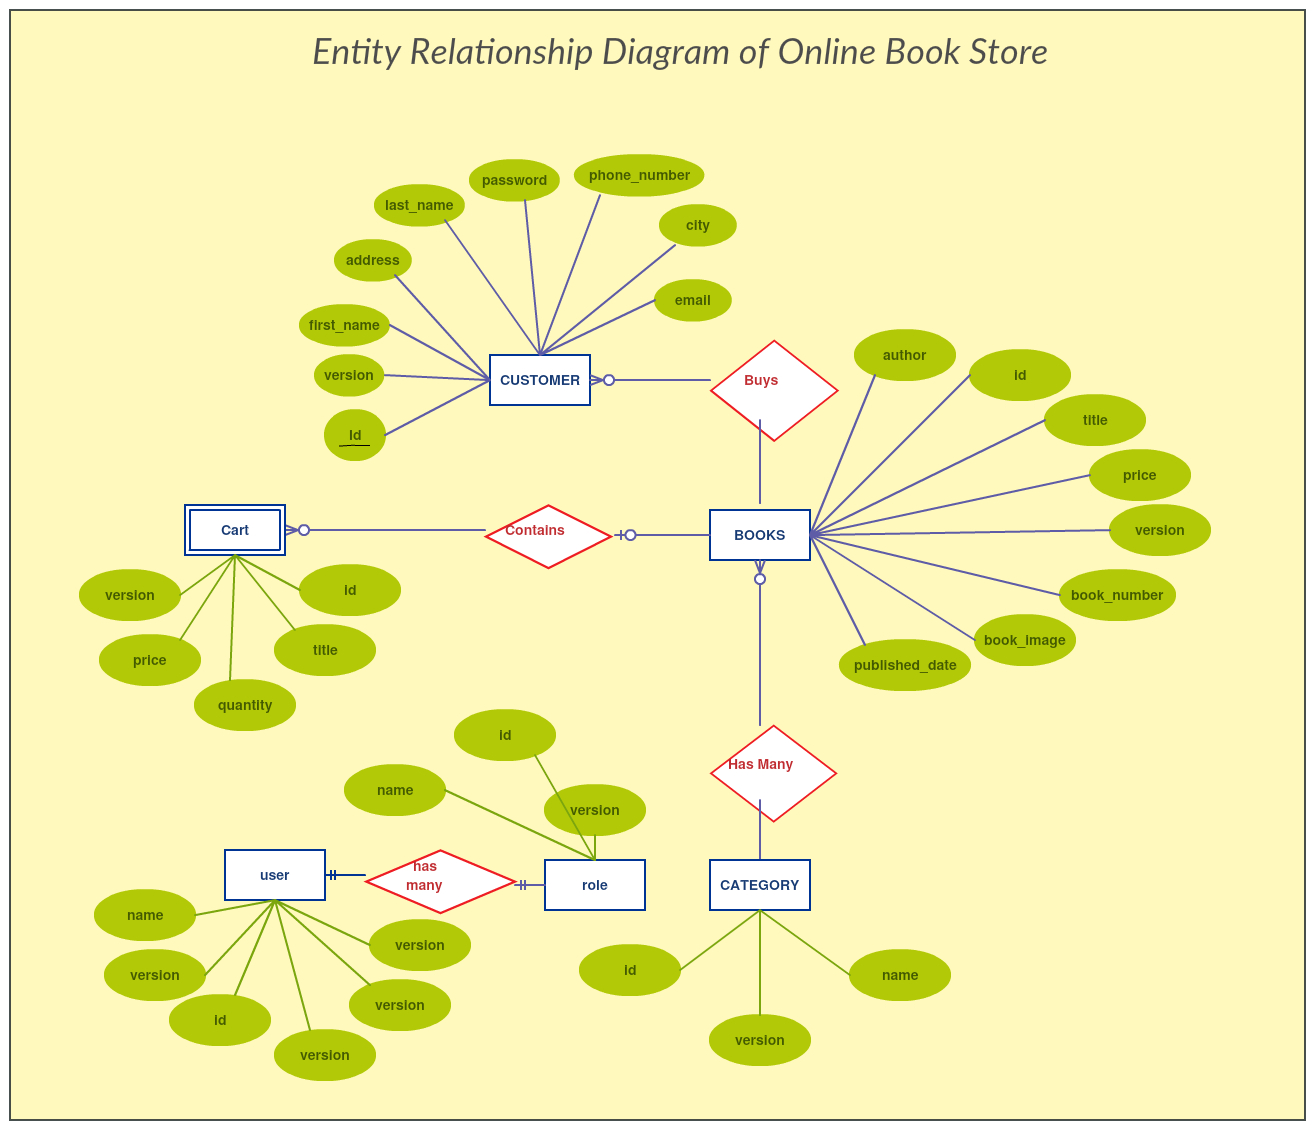 Pin On Entity Relationship Diagram Templates pertaining to Er Diagram For Online Shopping